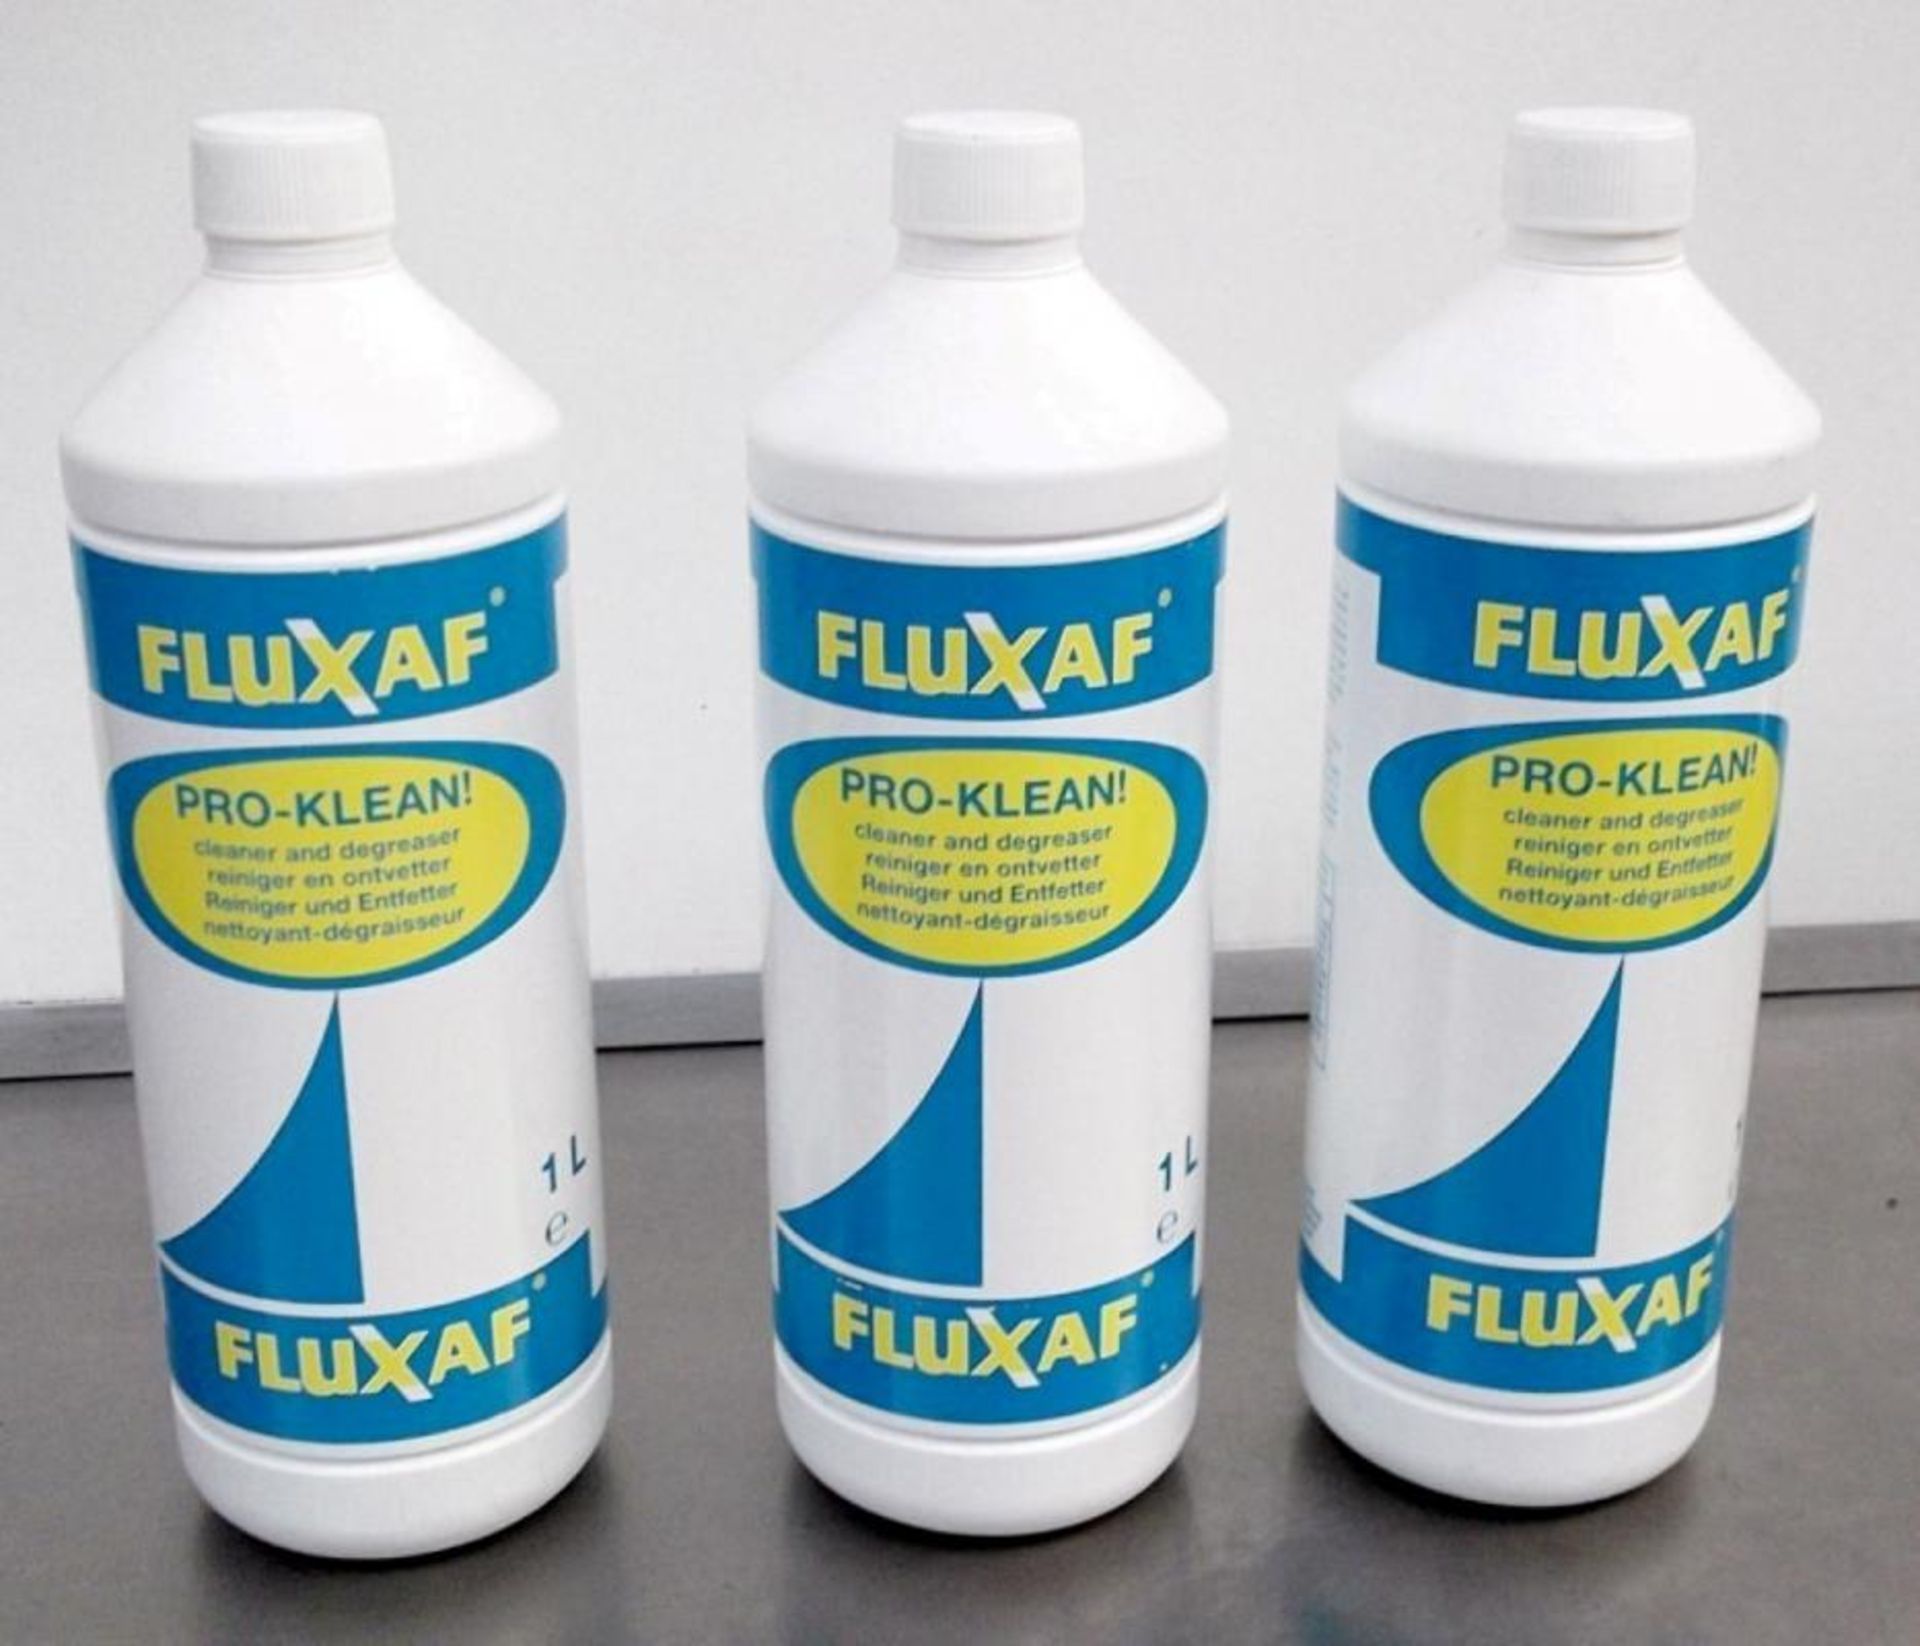 17 x Fluxaf "Pro-Klean" Professional Cleaner and Degreaser - Supplied In 1 Litre Bottles -